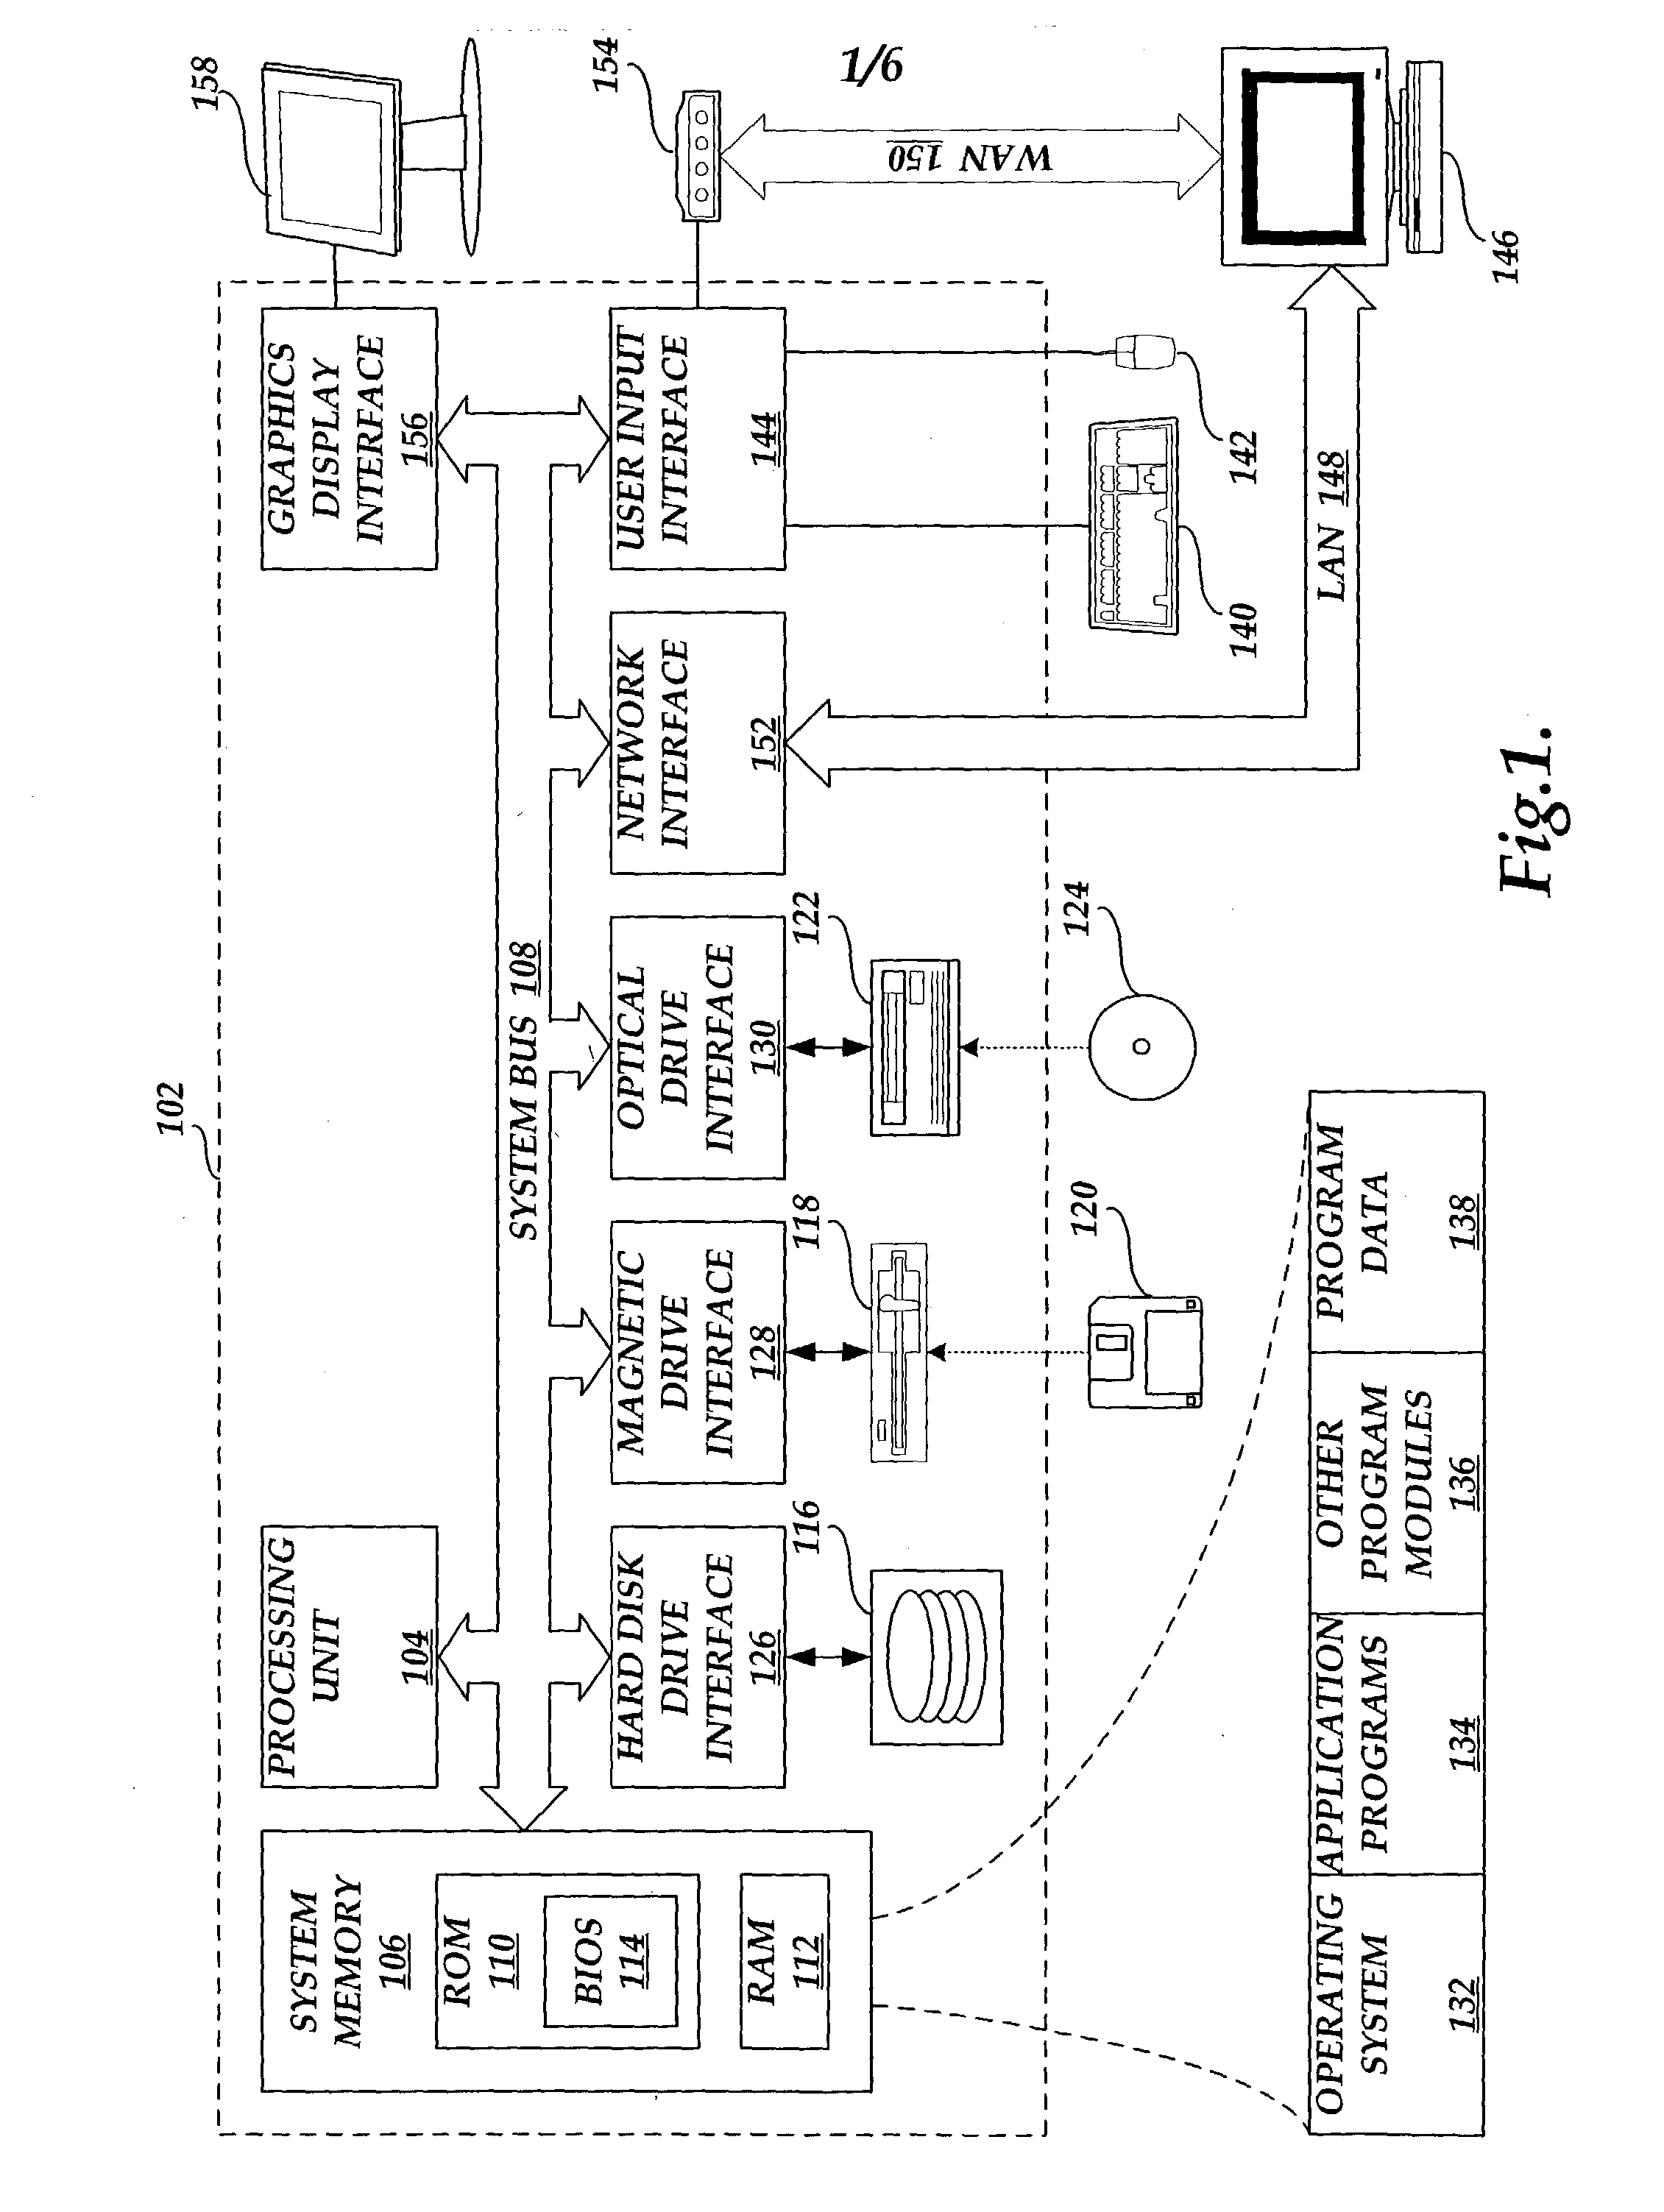 System and method for securely delivering installation keys to a production facility